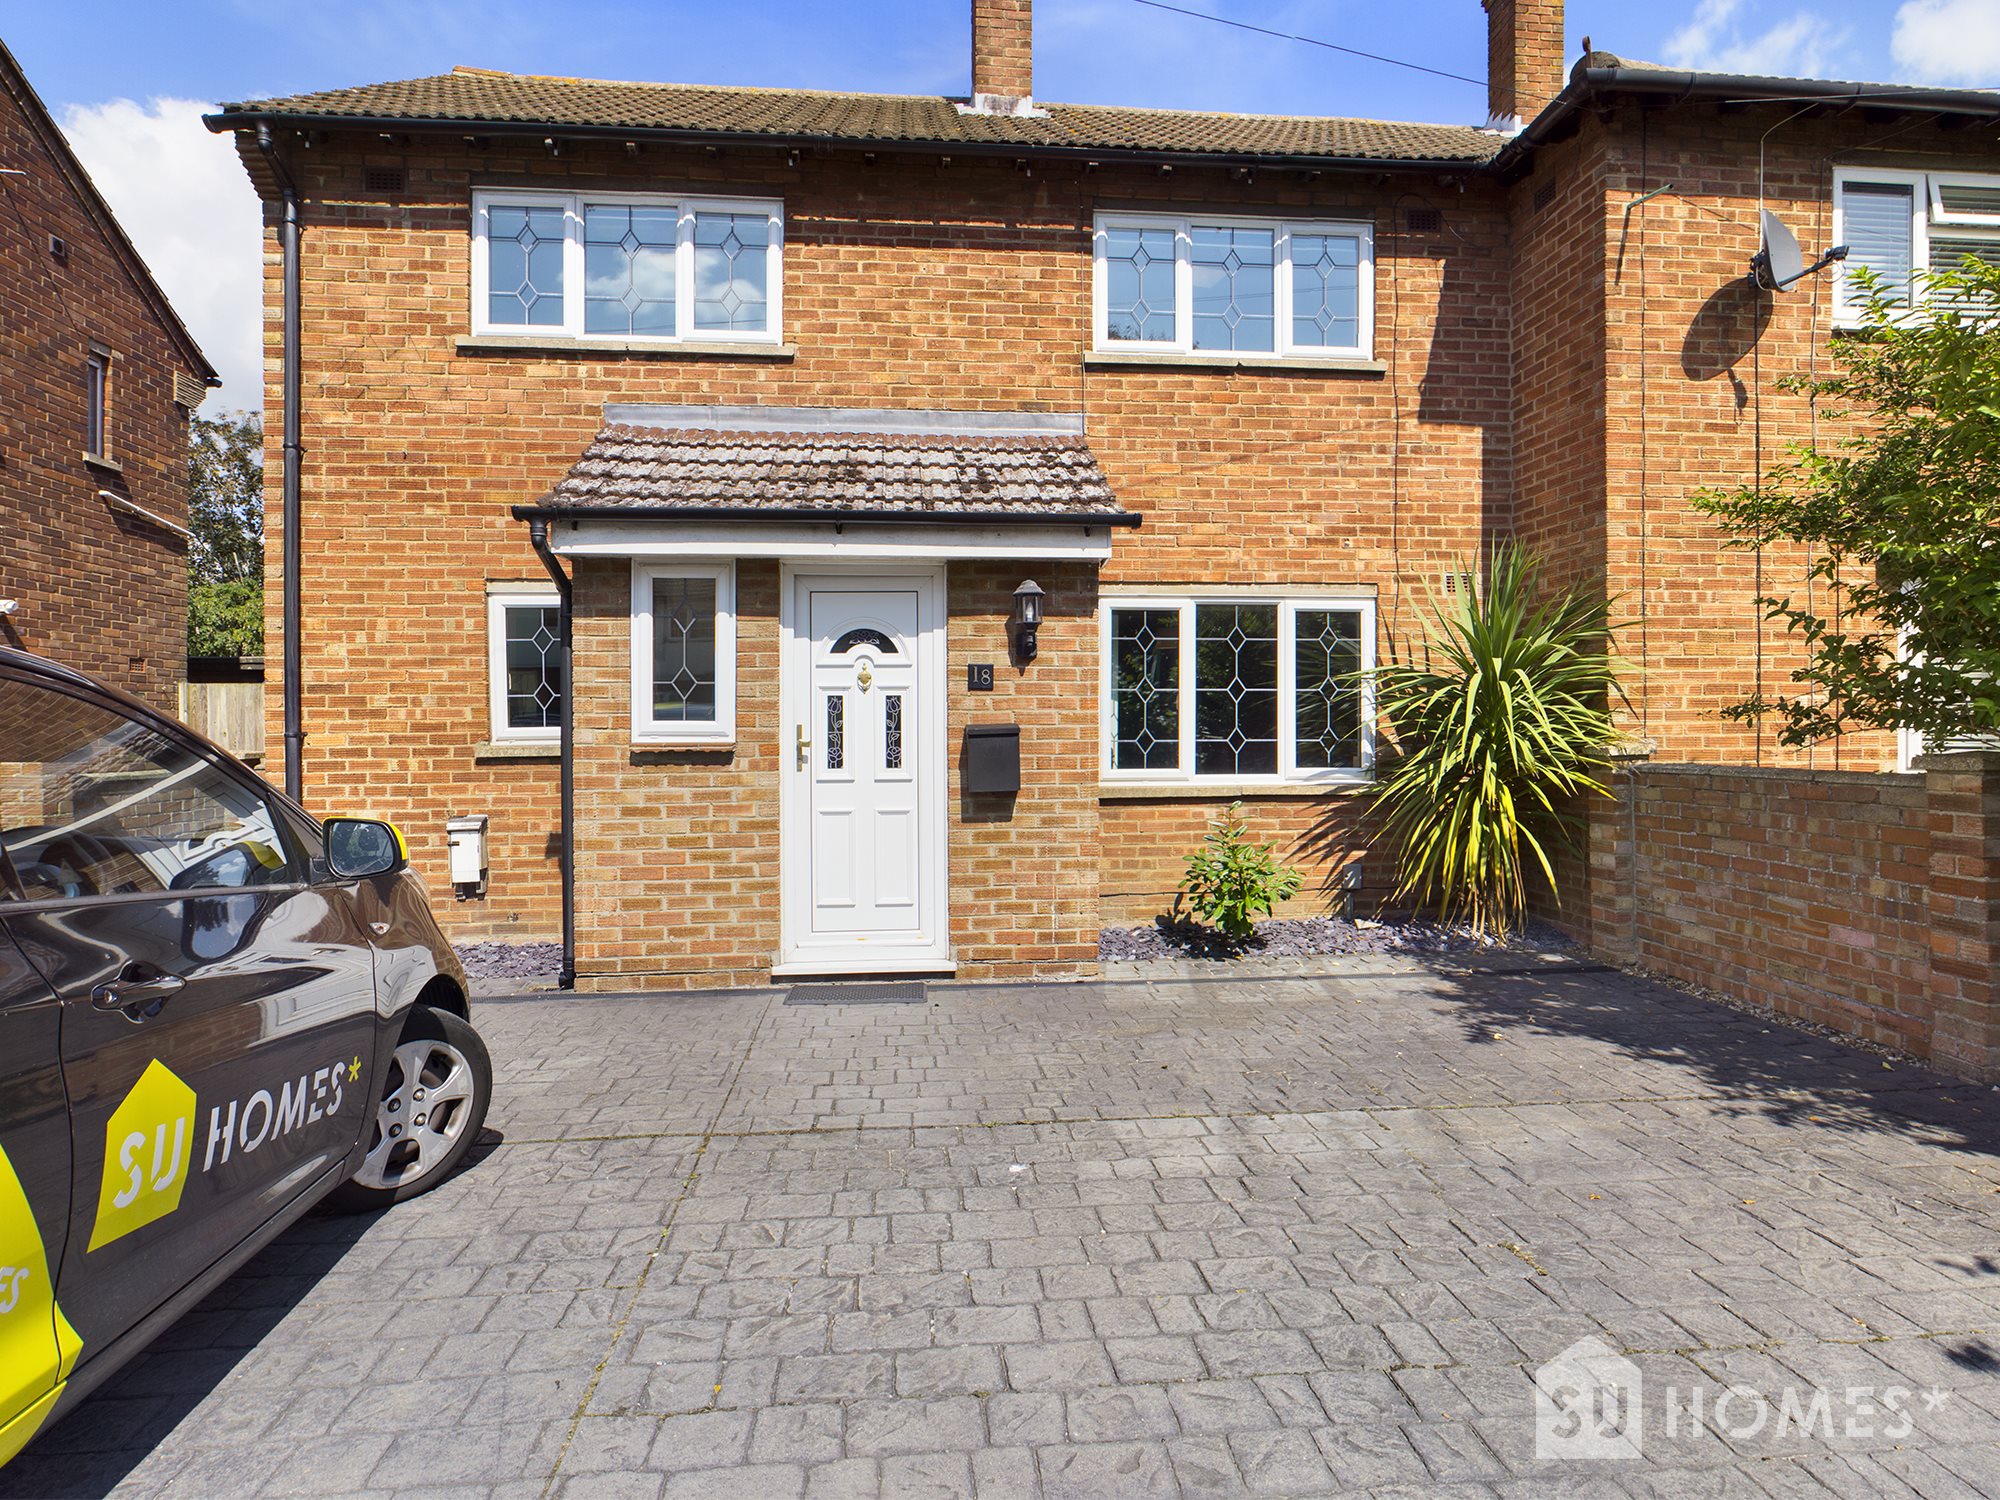 5 bed house to rent in Hickory Avenue, Colchester - Property Image 1